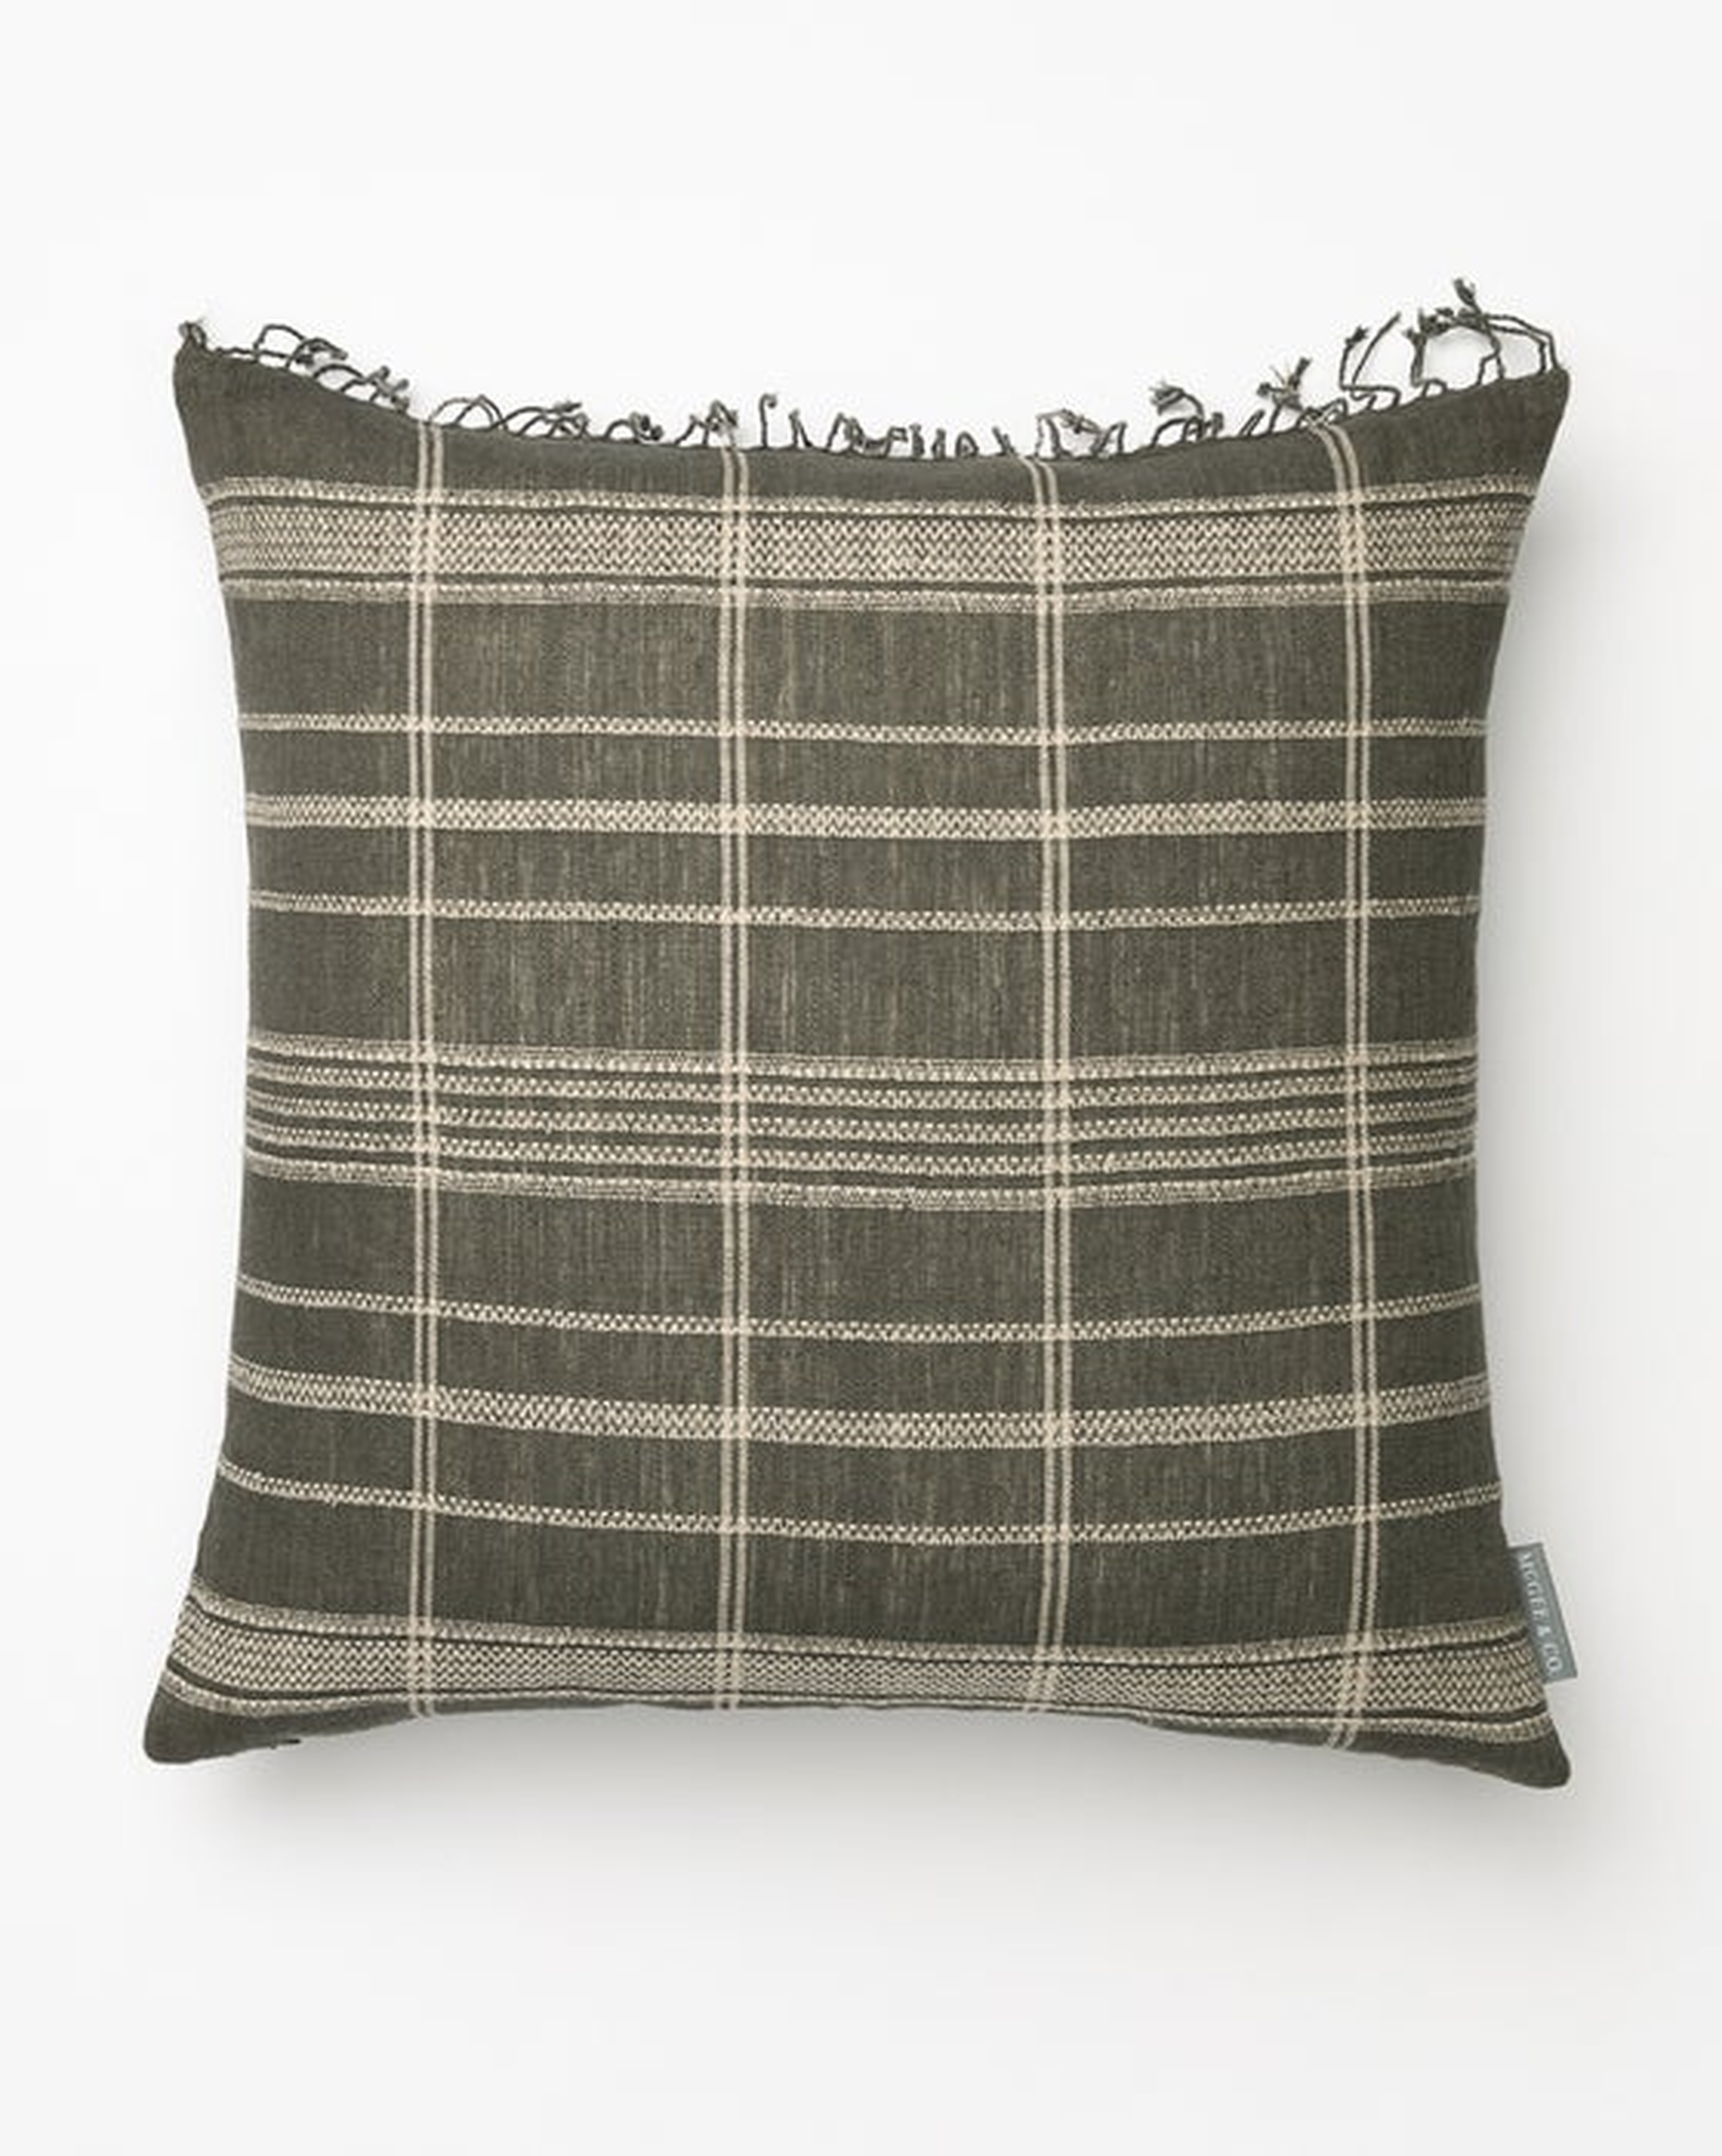 Jonah Pillow Cover - McGee & Co.